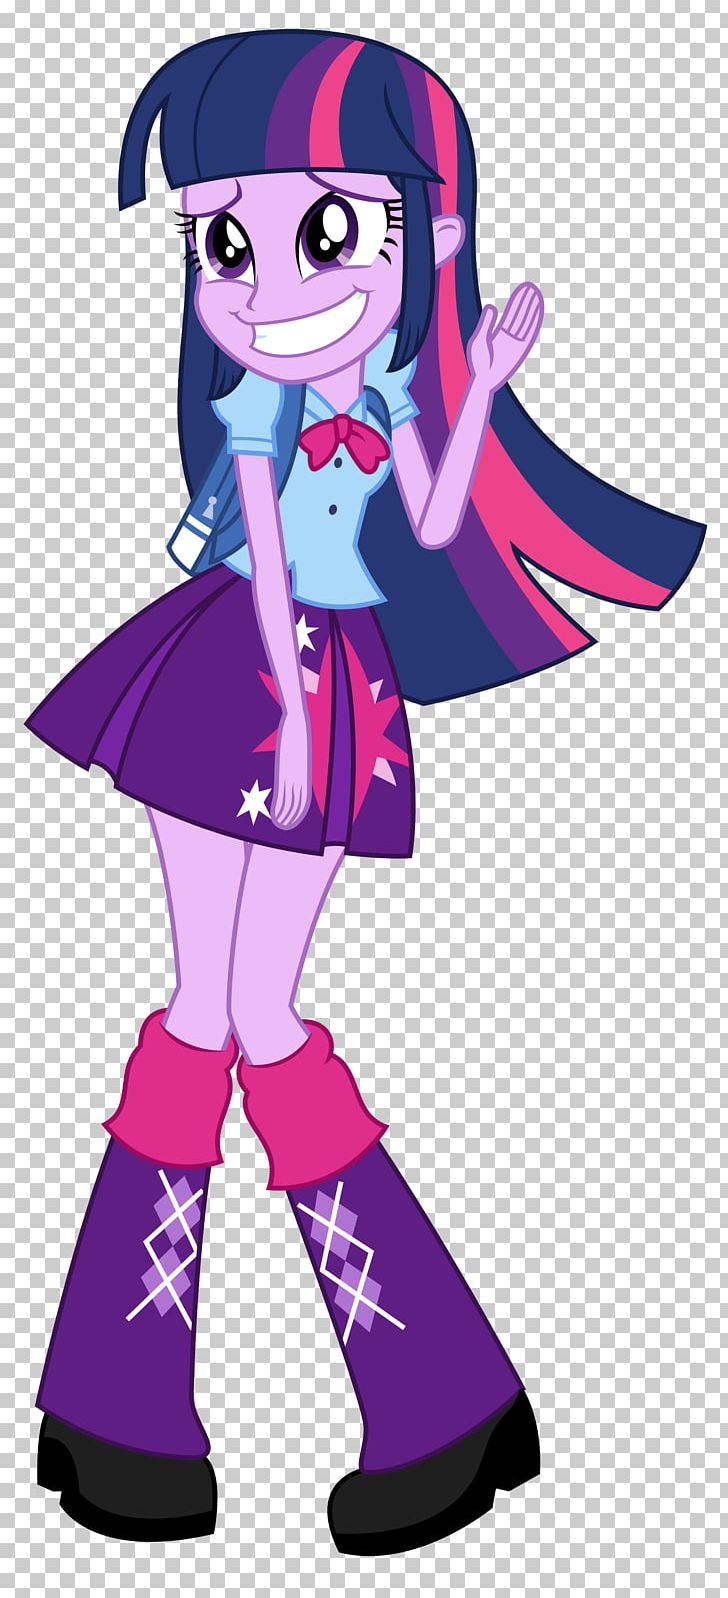 Twilight Sparkle Princess Celestia My Little Pony: Equestria Girls Pinkie Pie PNG, Clipart, Alicorn, Cartoon, Deviantart, Equestria, Equestria Girls Free PNG Download